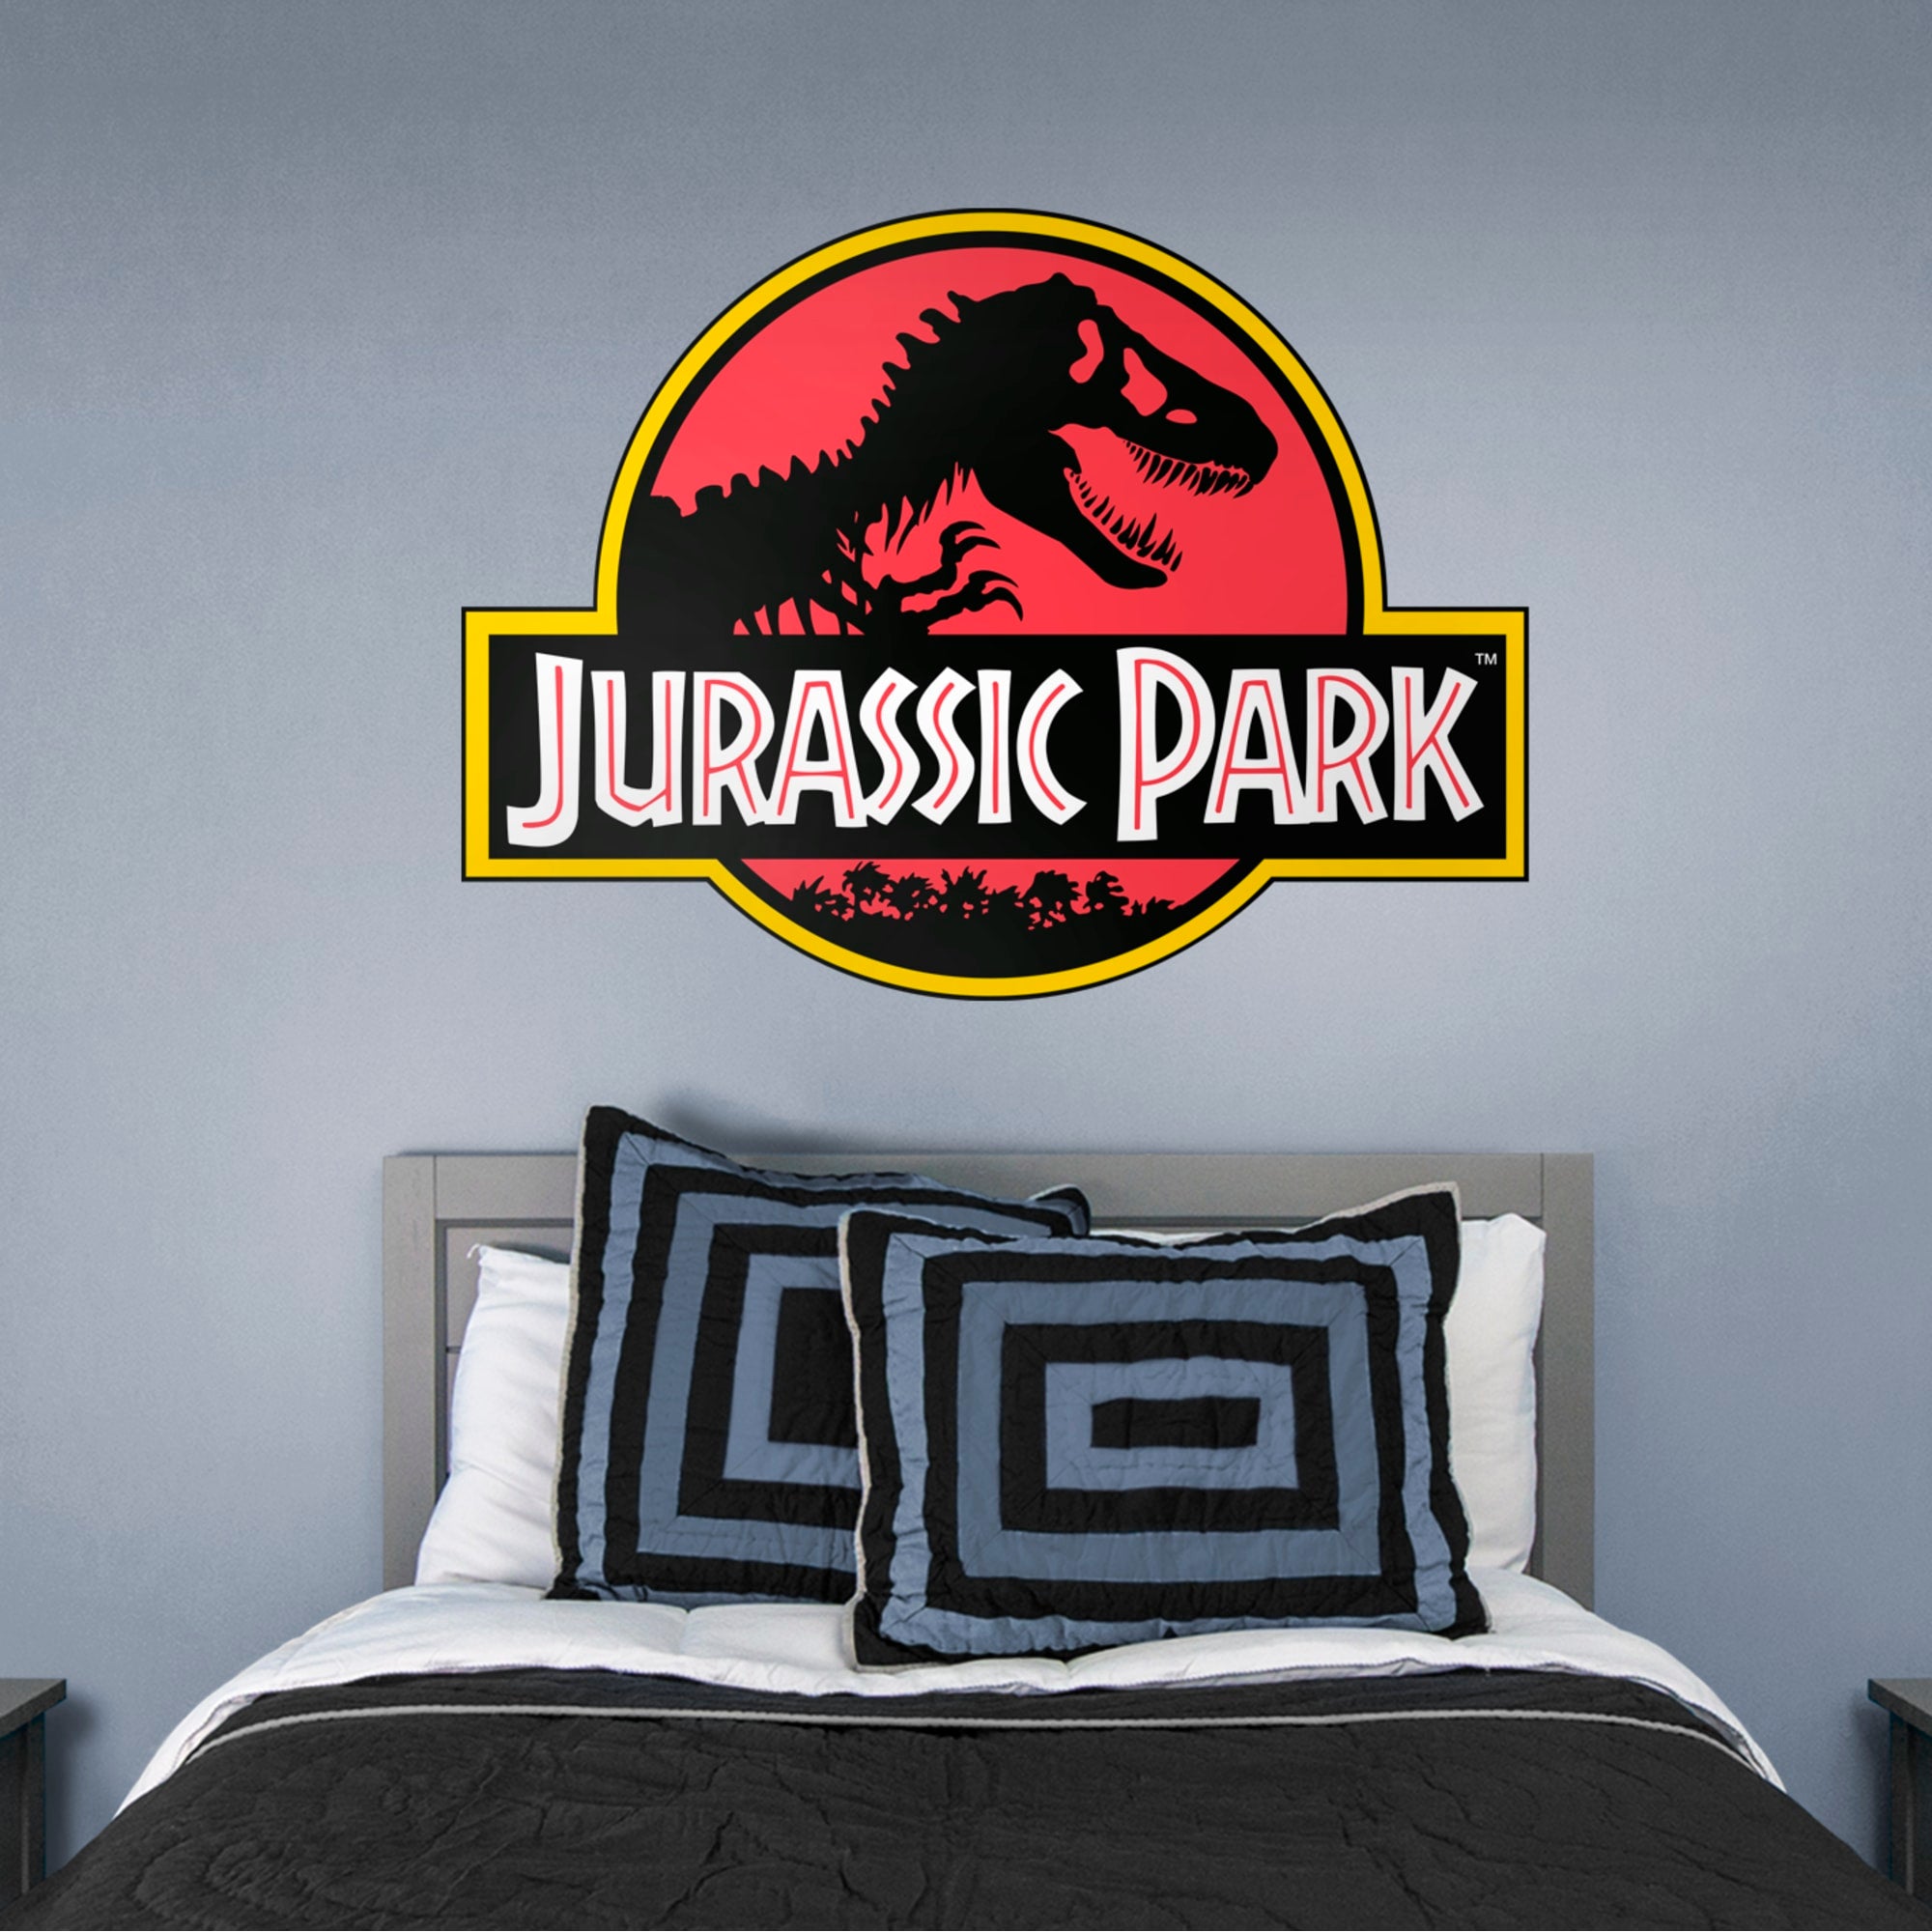 Jurassic Park: Classic Logo - Officially Licensed Removable Wall Decal 51.0"W x 38.0"H by Fathead | Vinyl